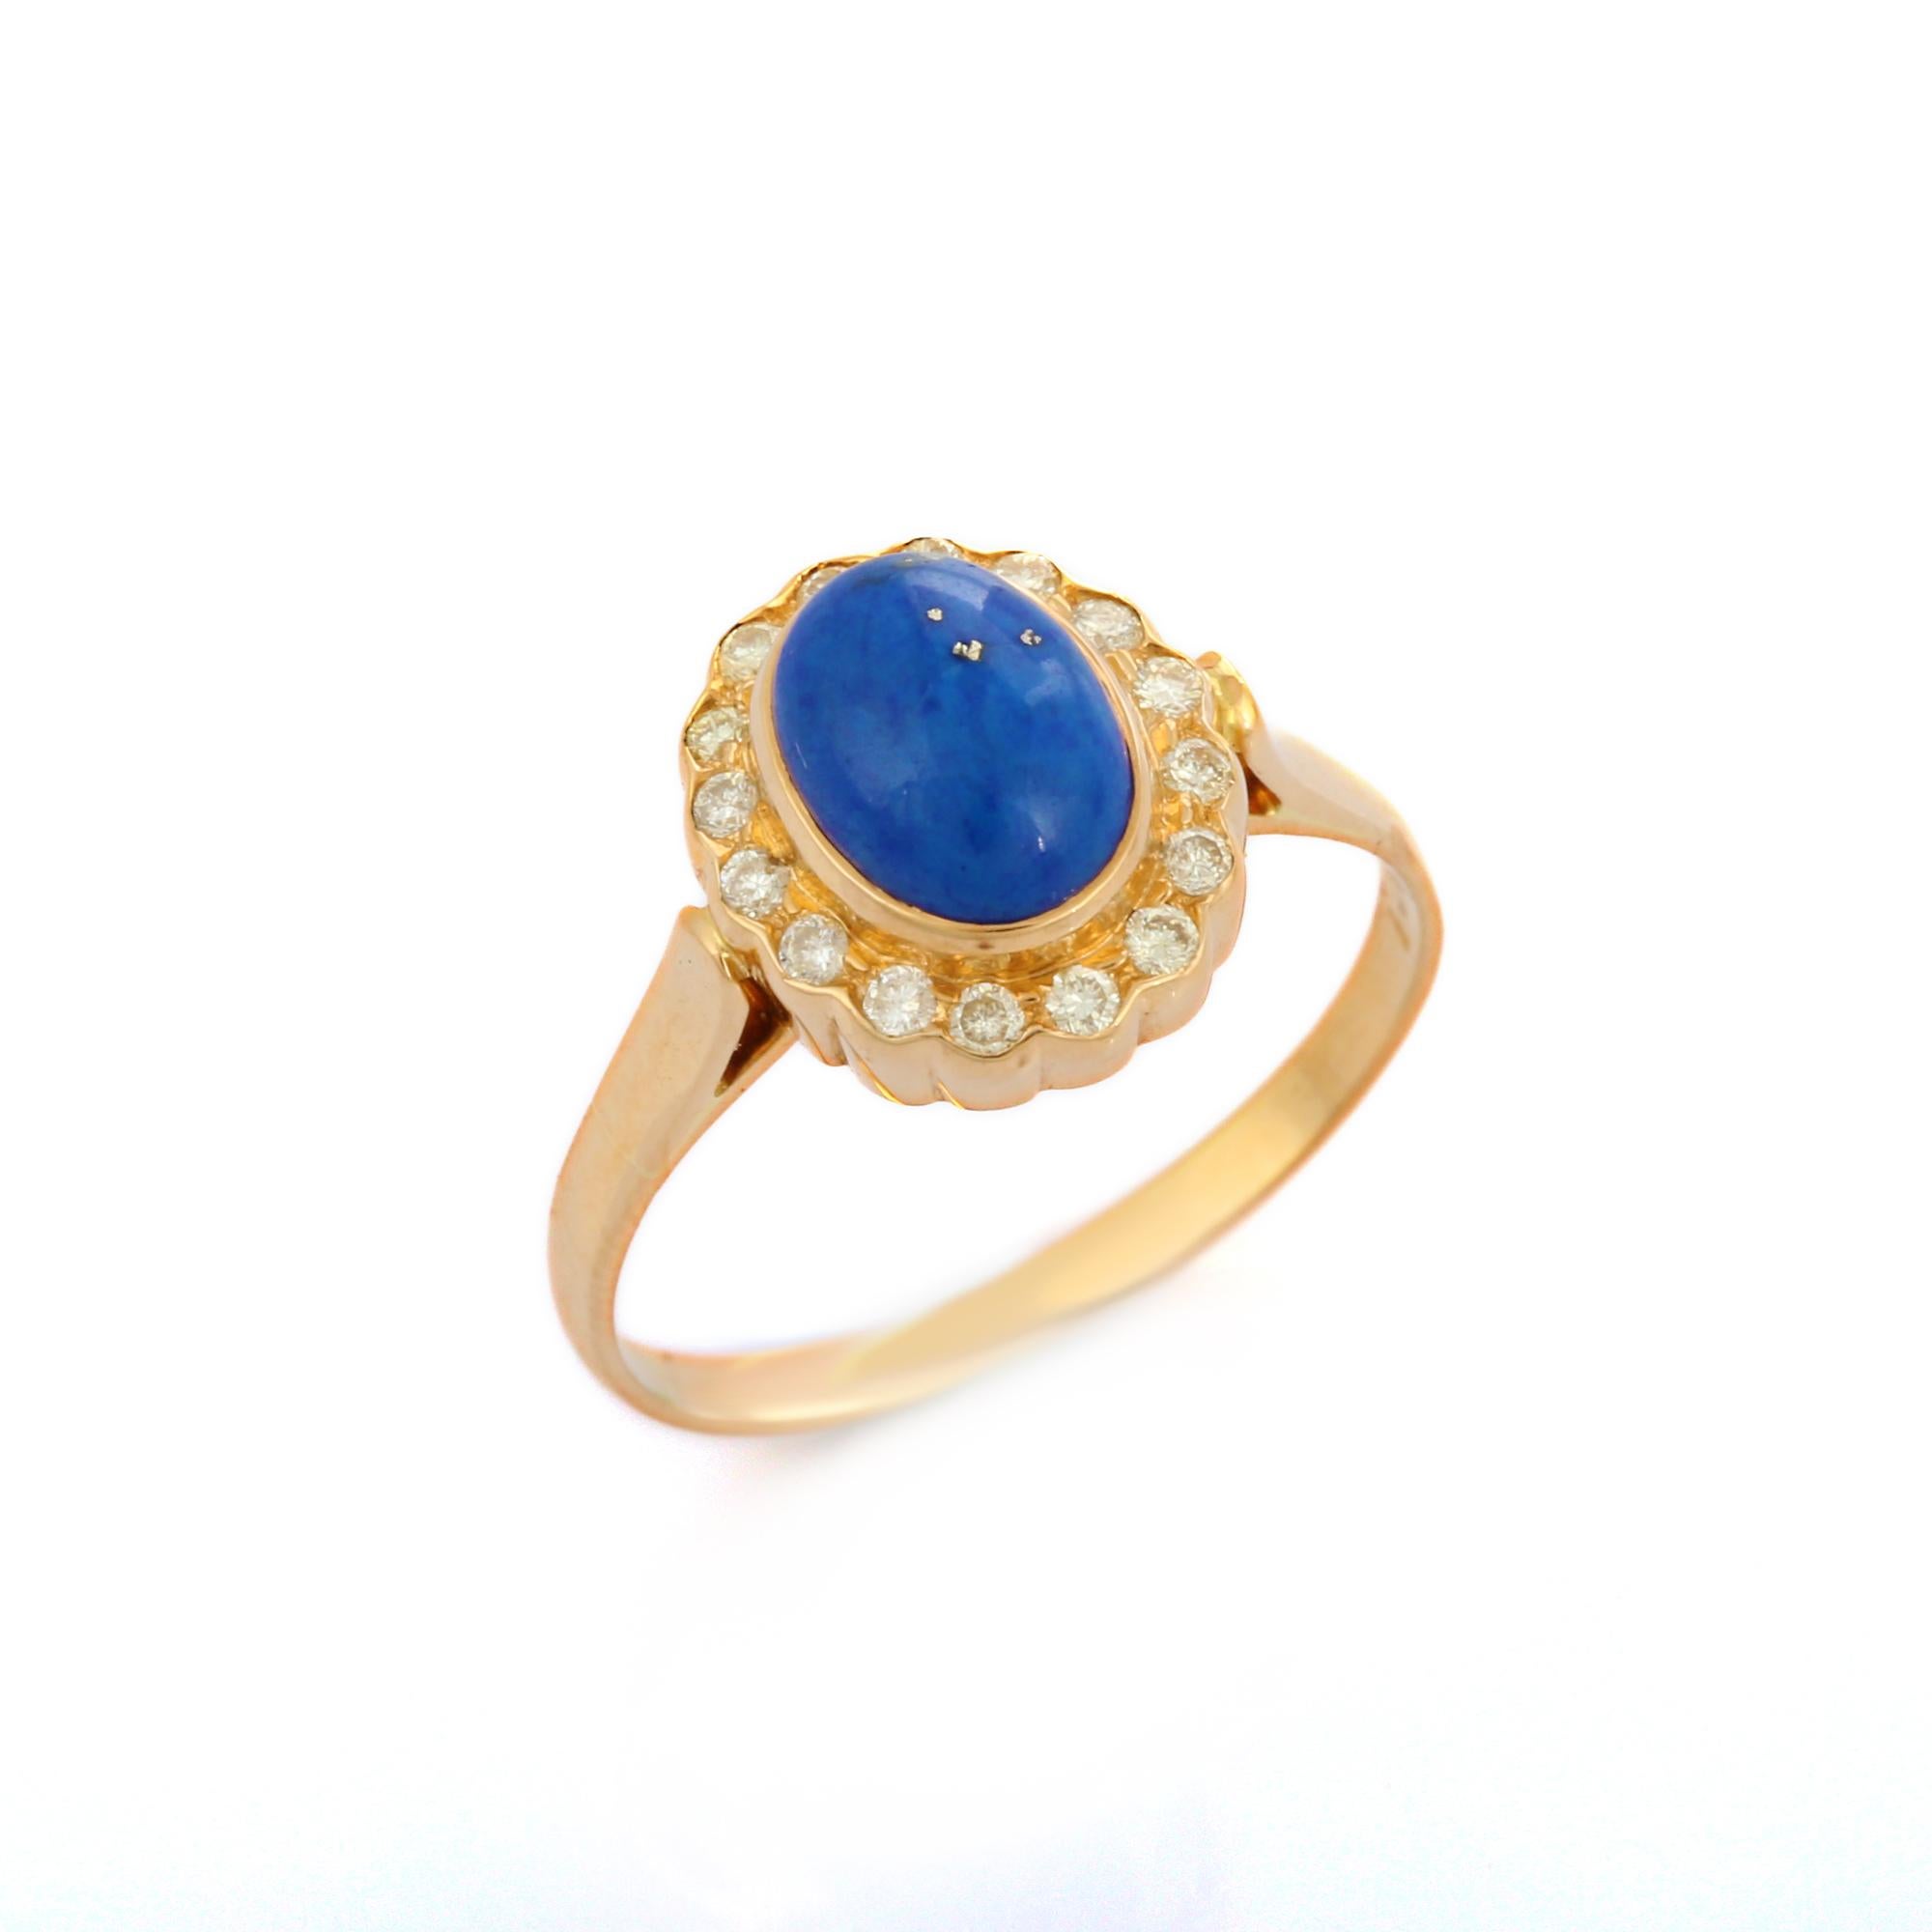 For Sale:  18K Yellow Gold 1.15 Carat Lapis Lazuli with Halo Diamond Cocktail Ring 7